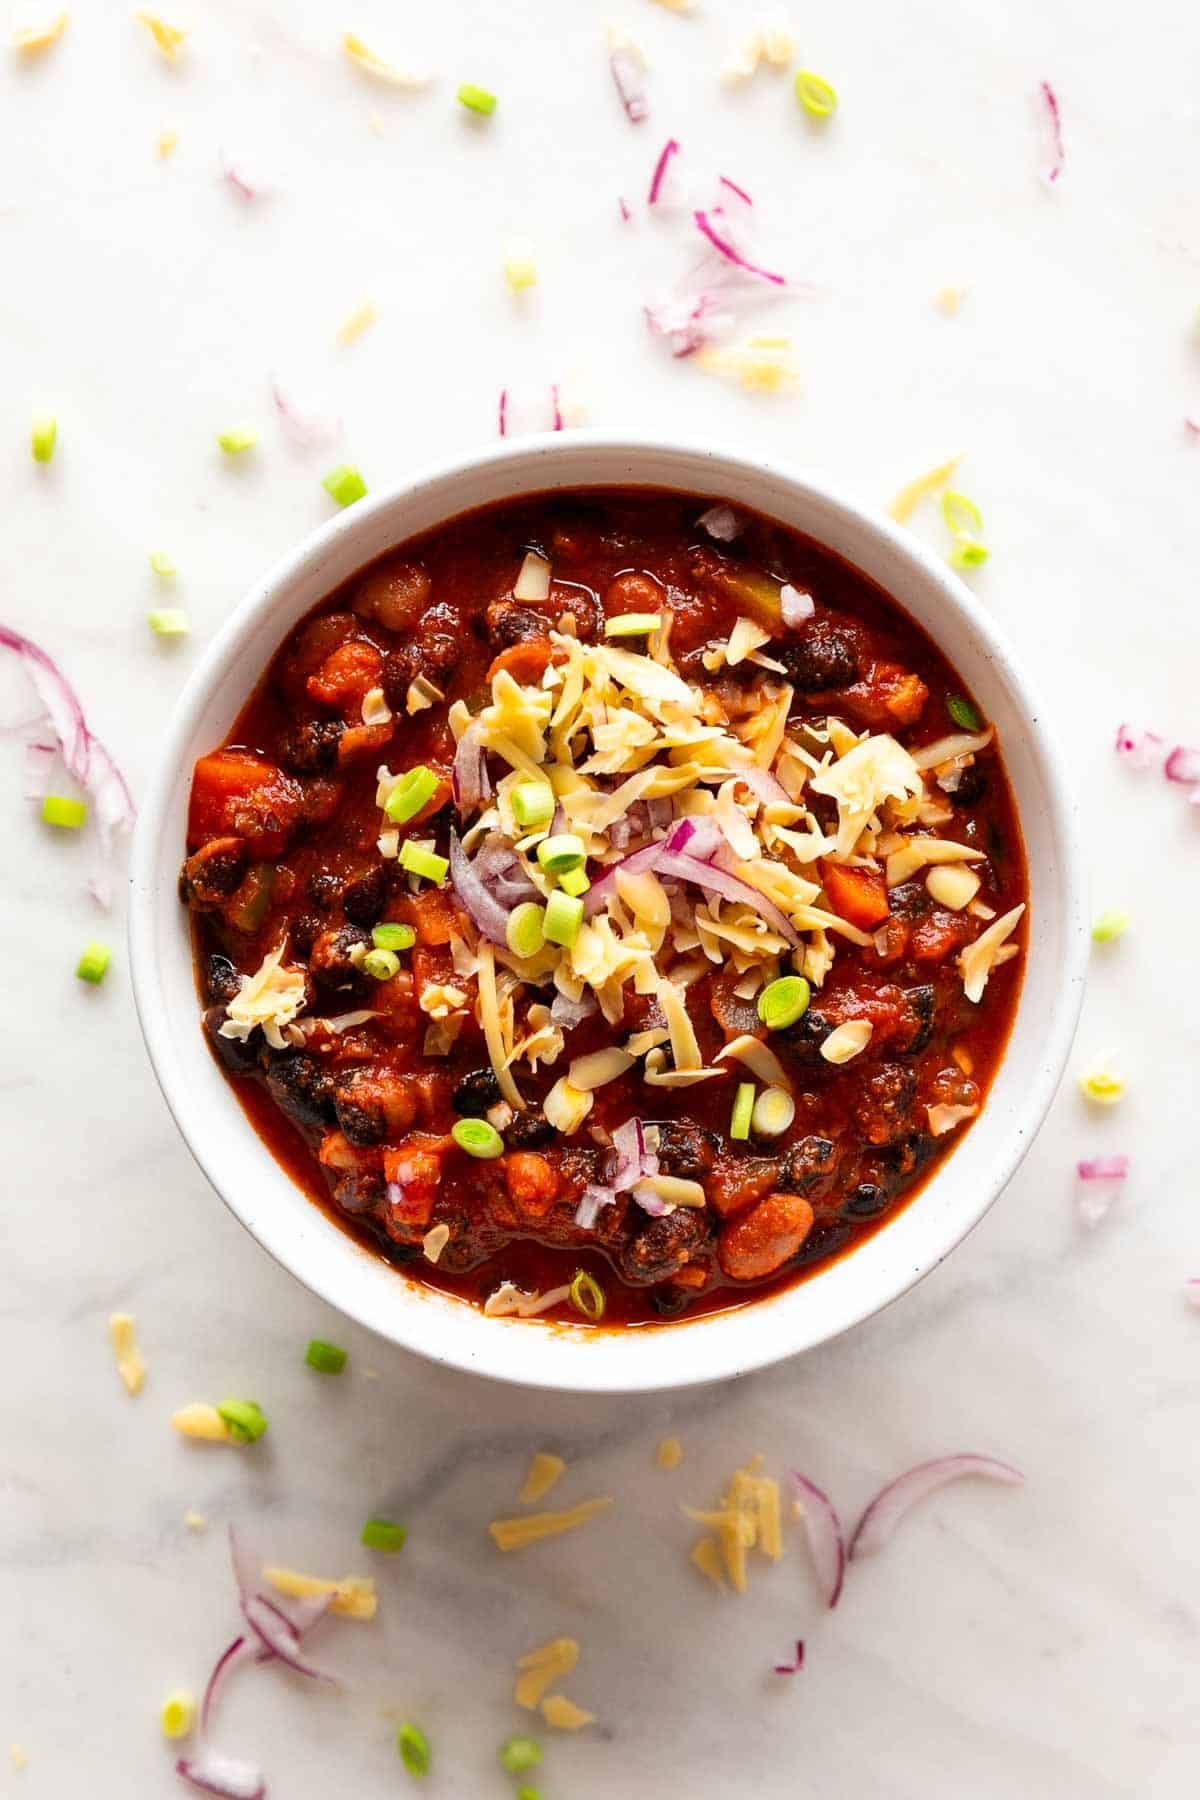 Chili bowl adorned with green onions, red onion, and vegan shredded cheese.